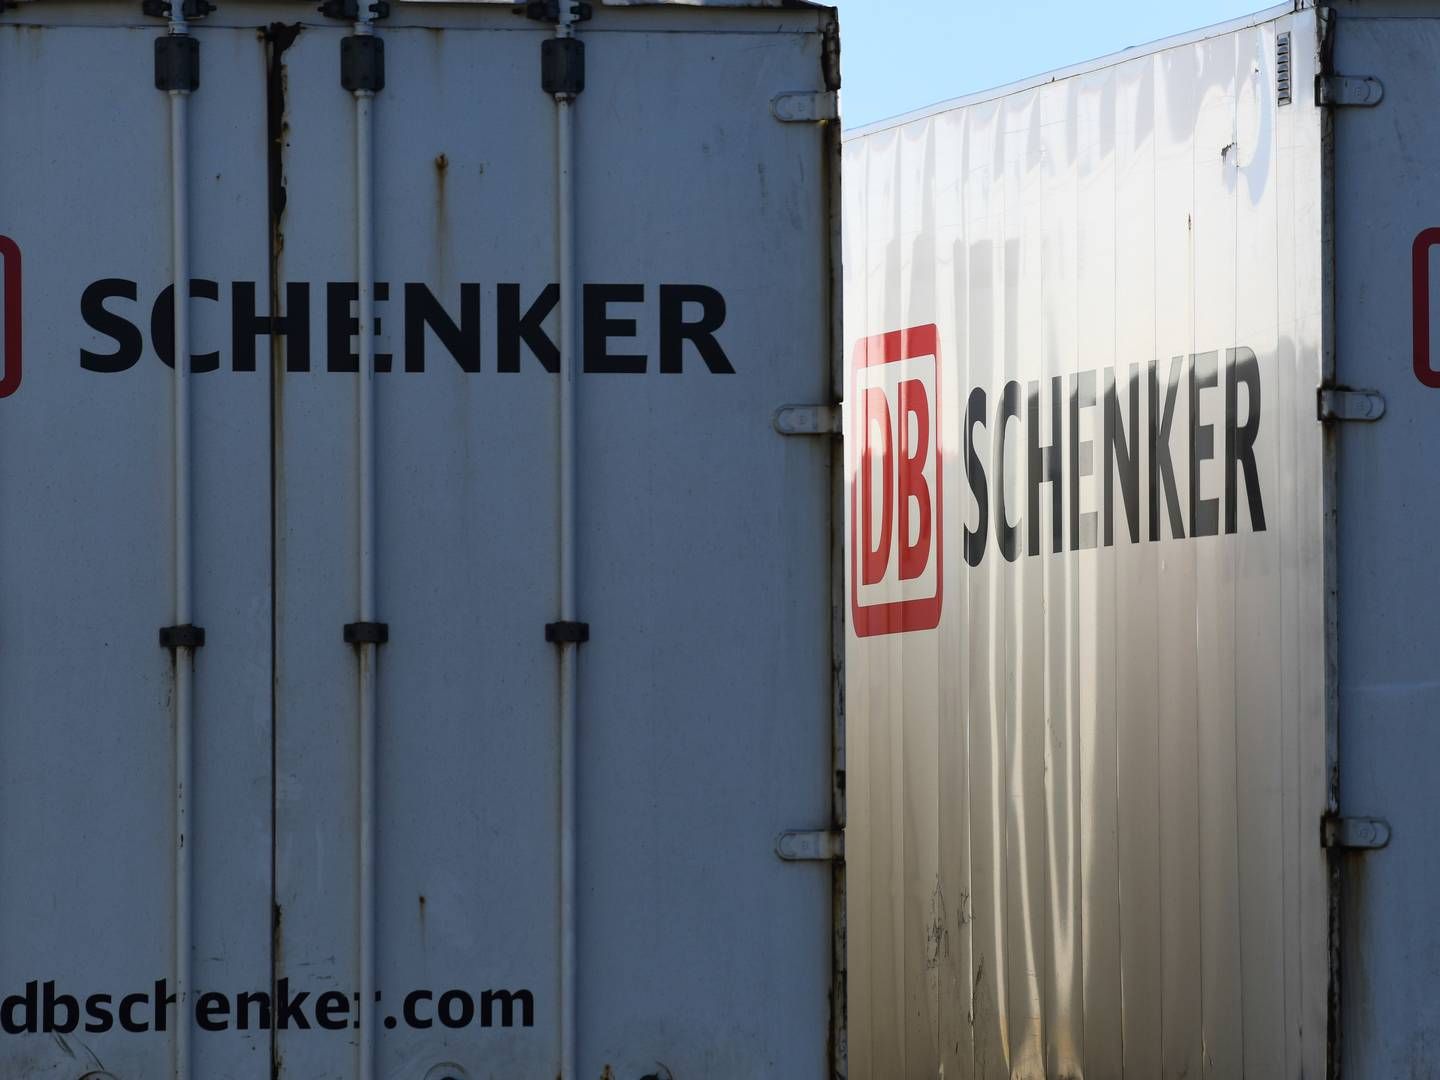 The price will determine whether the sale of DB Schenker will go through, sources tell DPA. | Photo: Marvin Ibo G'ng'r/AP/Ritzau Scanpix